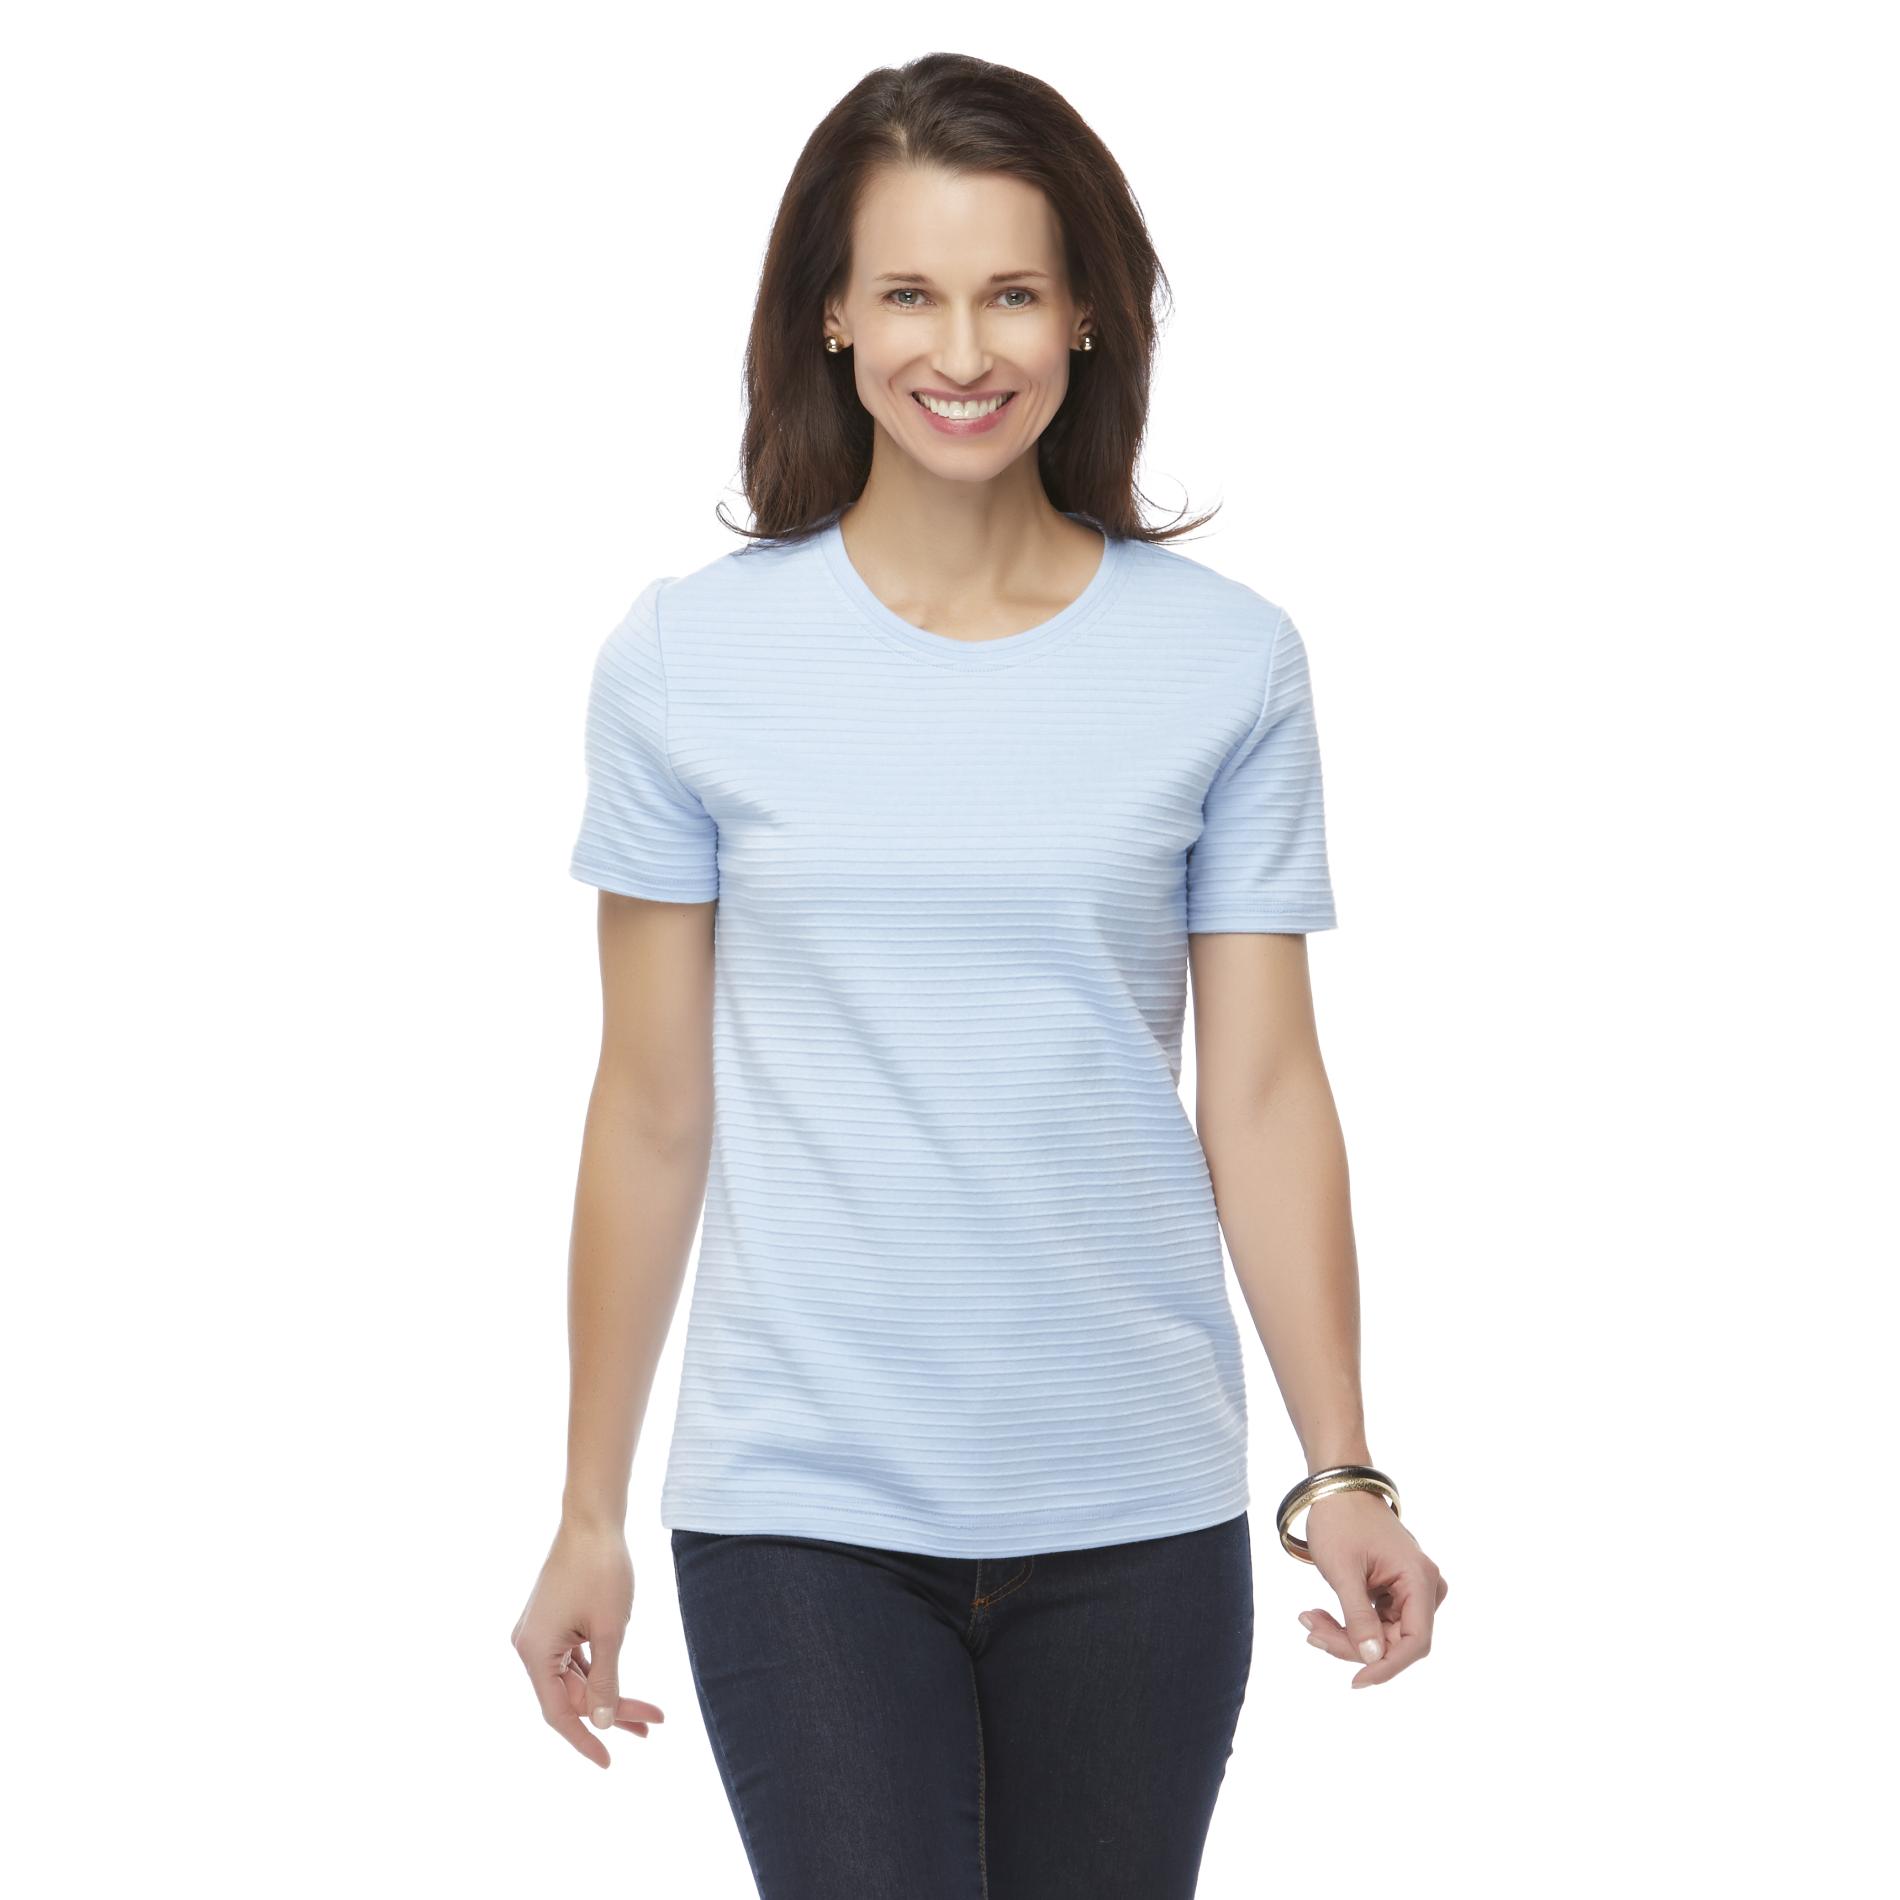 Basic Editions Women's Textured T-Shirt - Striped